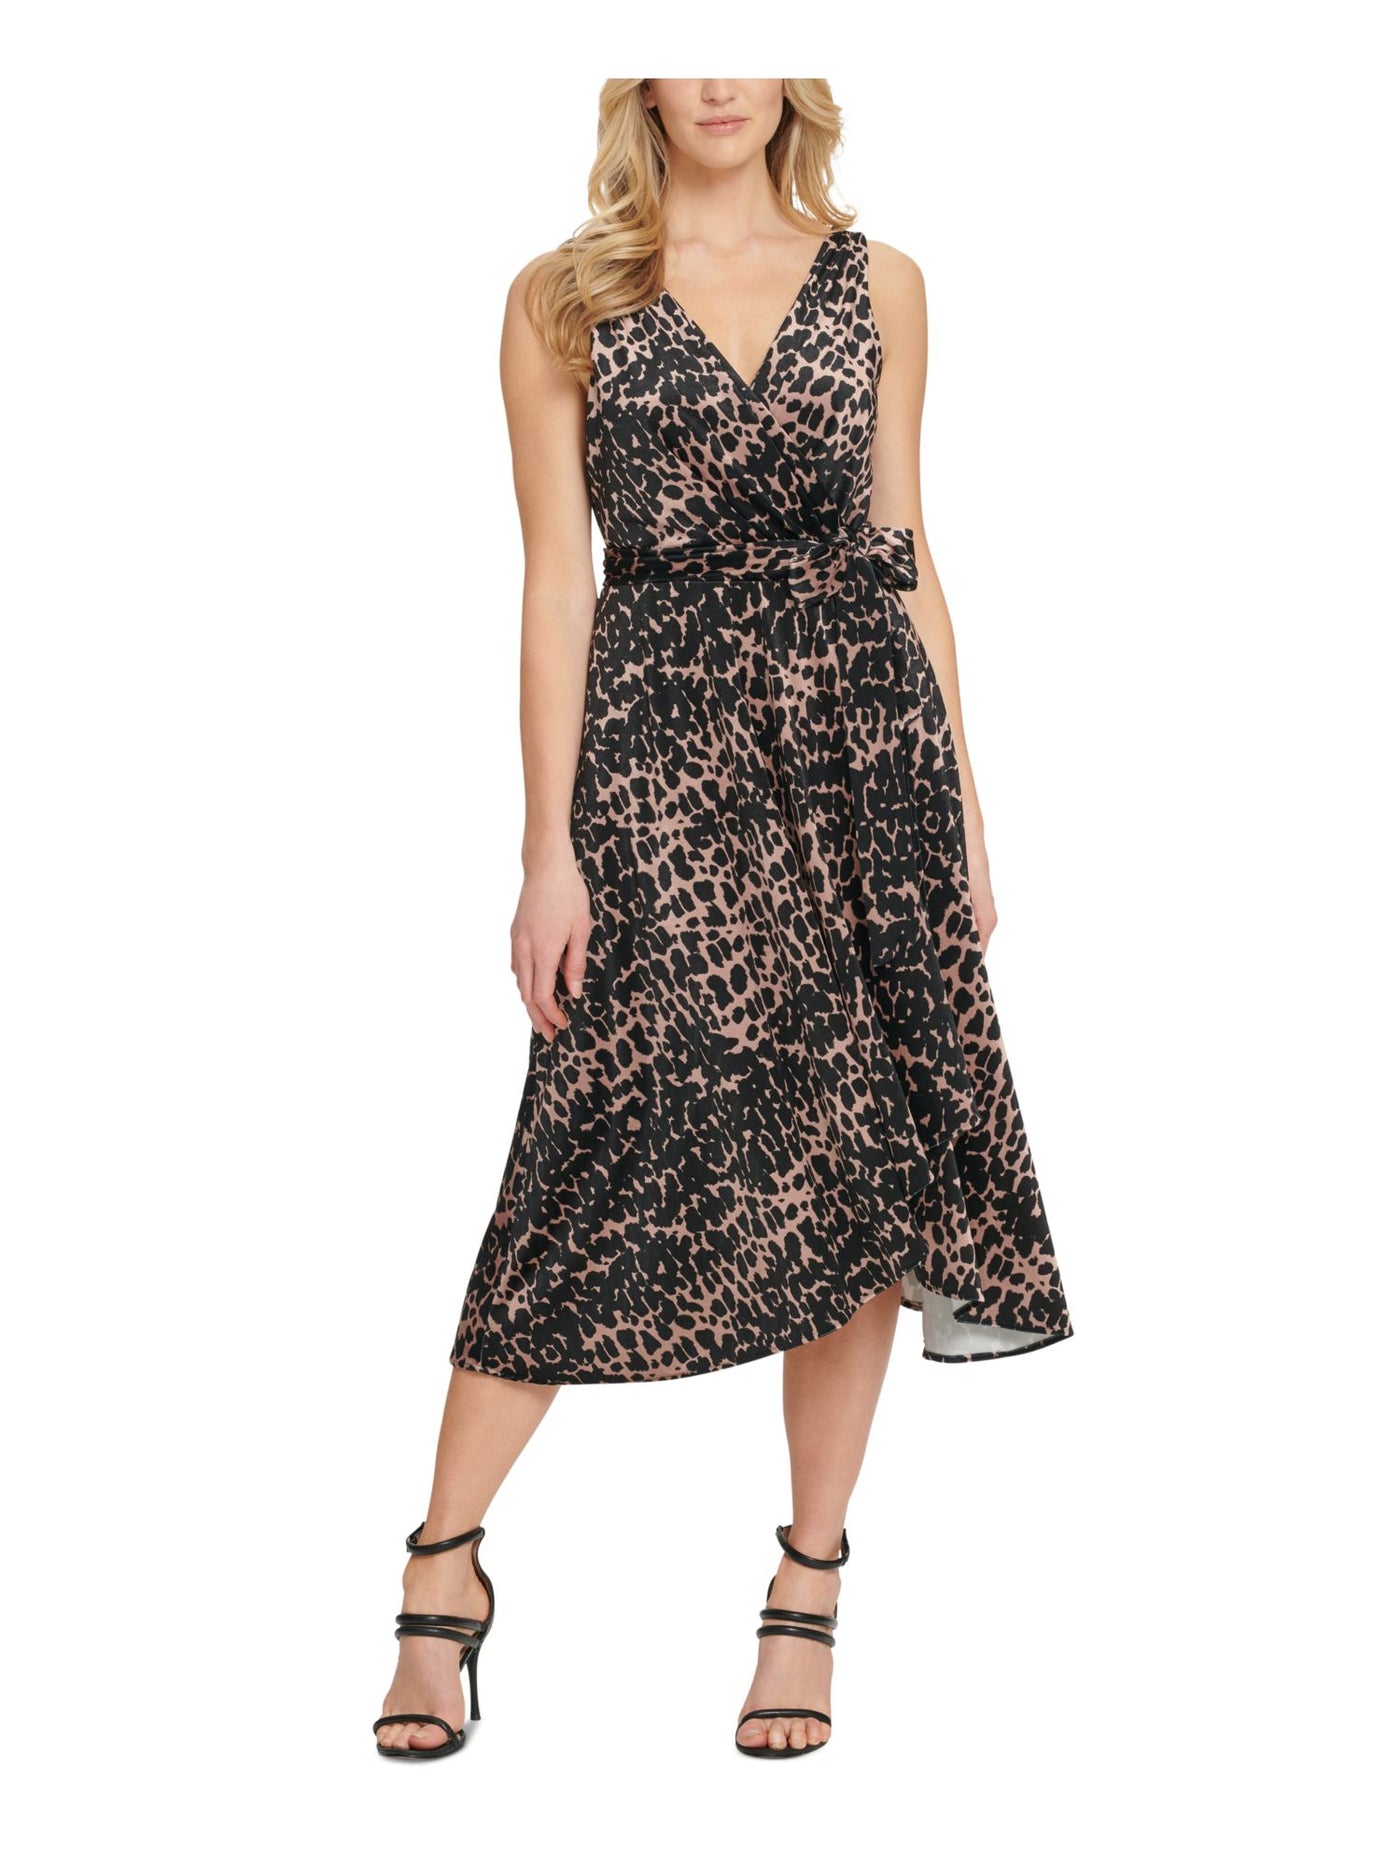 DKNY Womens Black Belted Animal Print Evening Faux Wrap Dress 2